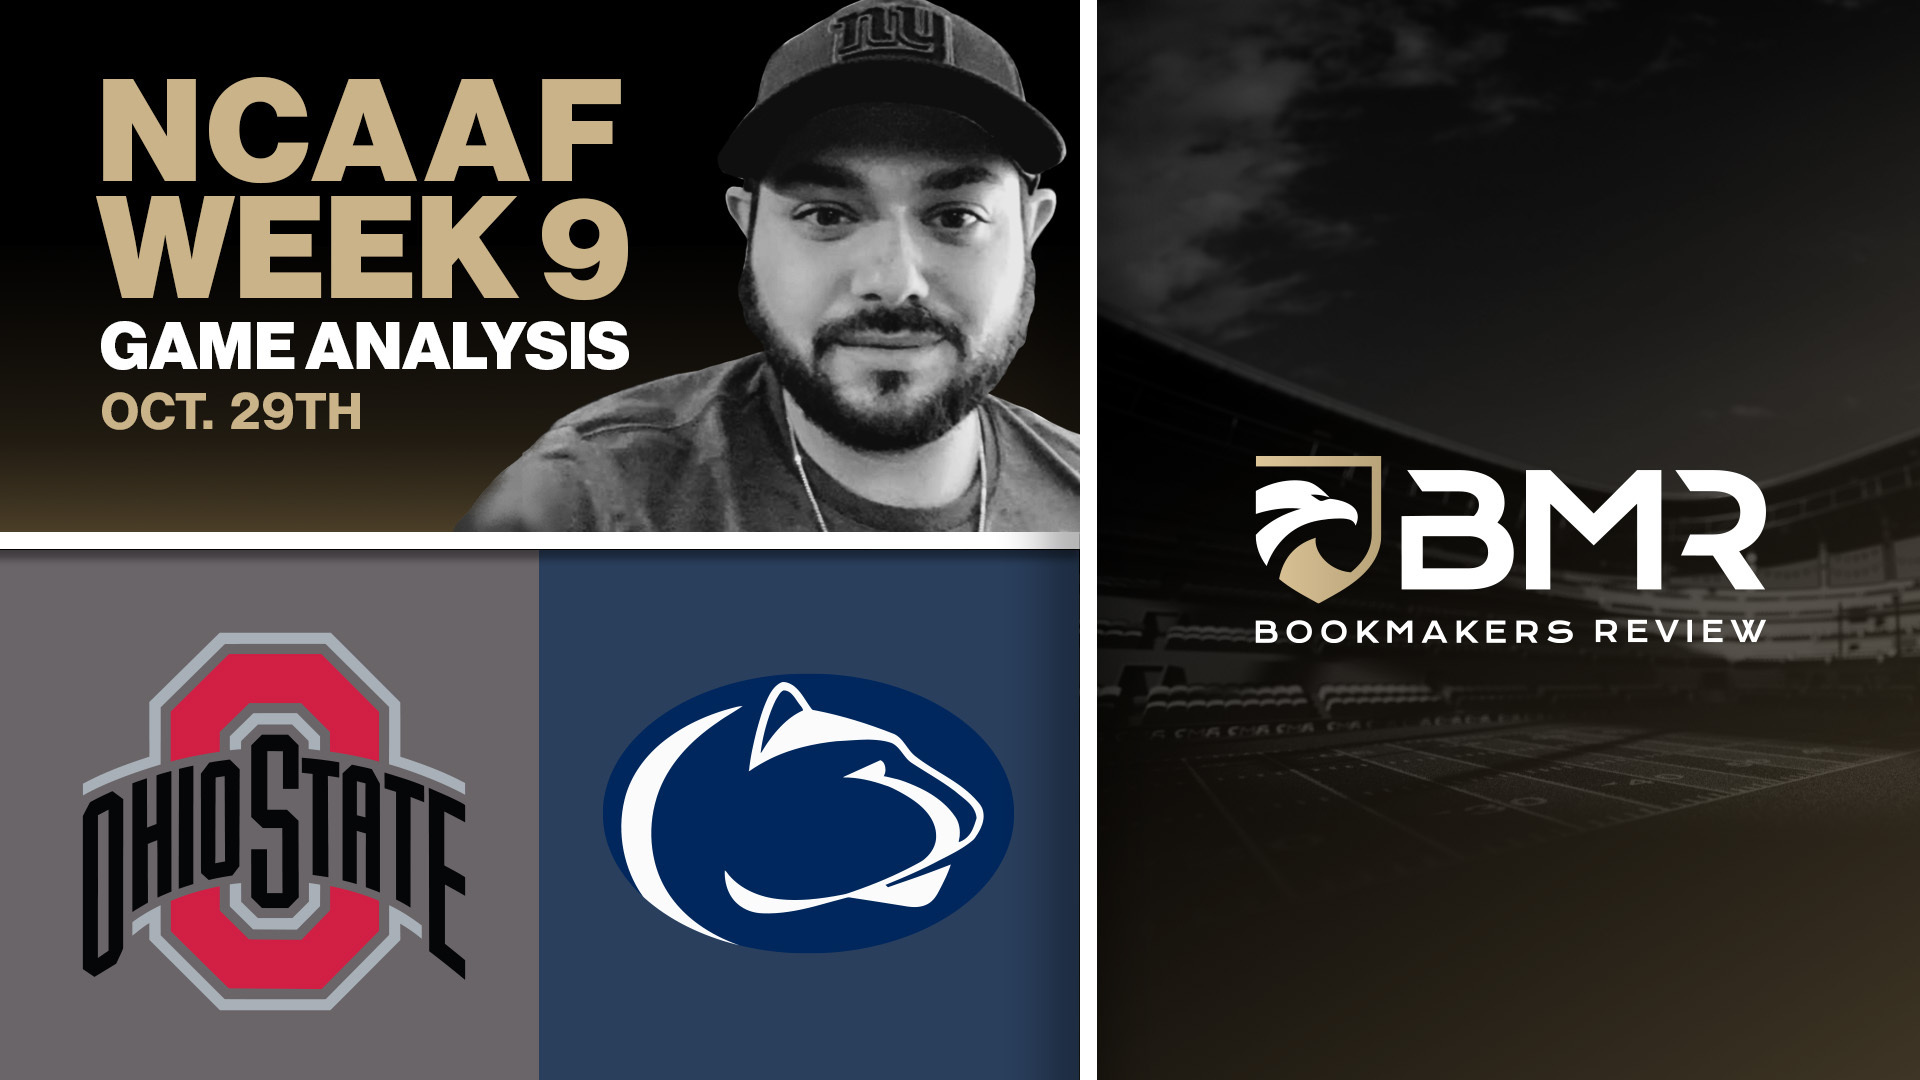 Ohio State vs. Penn State &#8211; NCAAF Week 9 Pick by Alpha Dog (Oct. 29th)